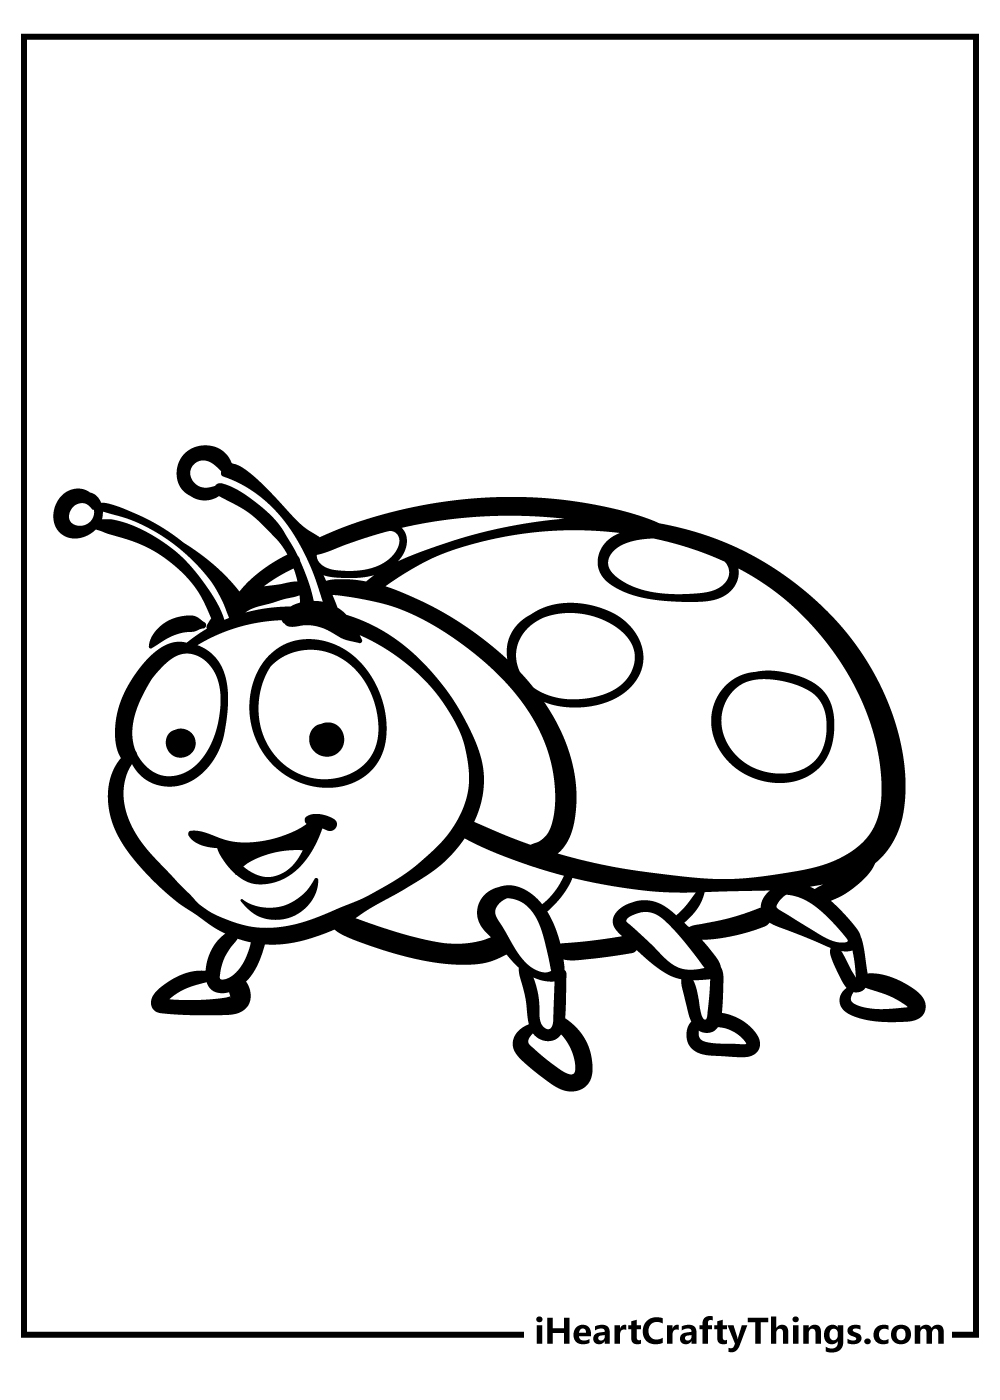 Ladybug Coloring Book for adults free download